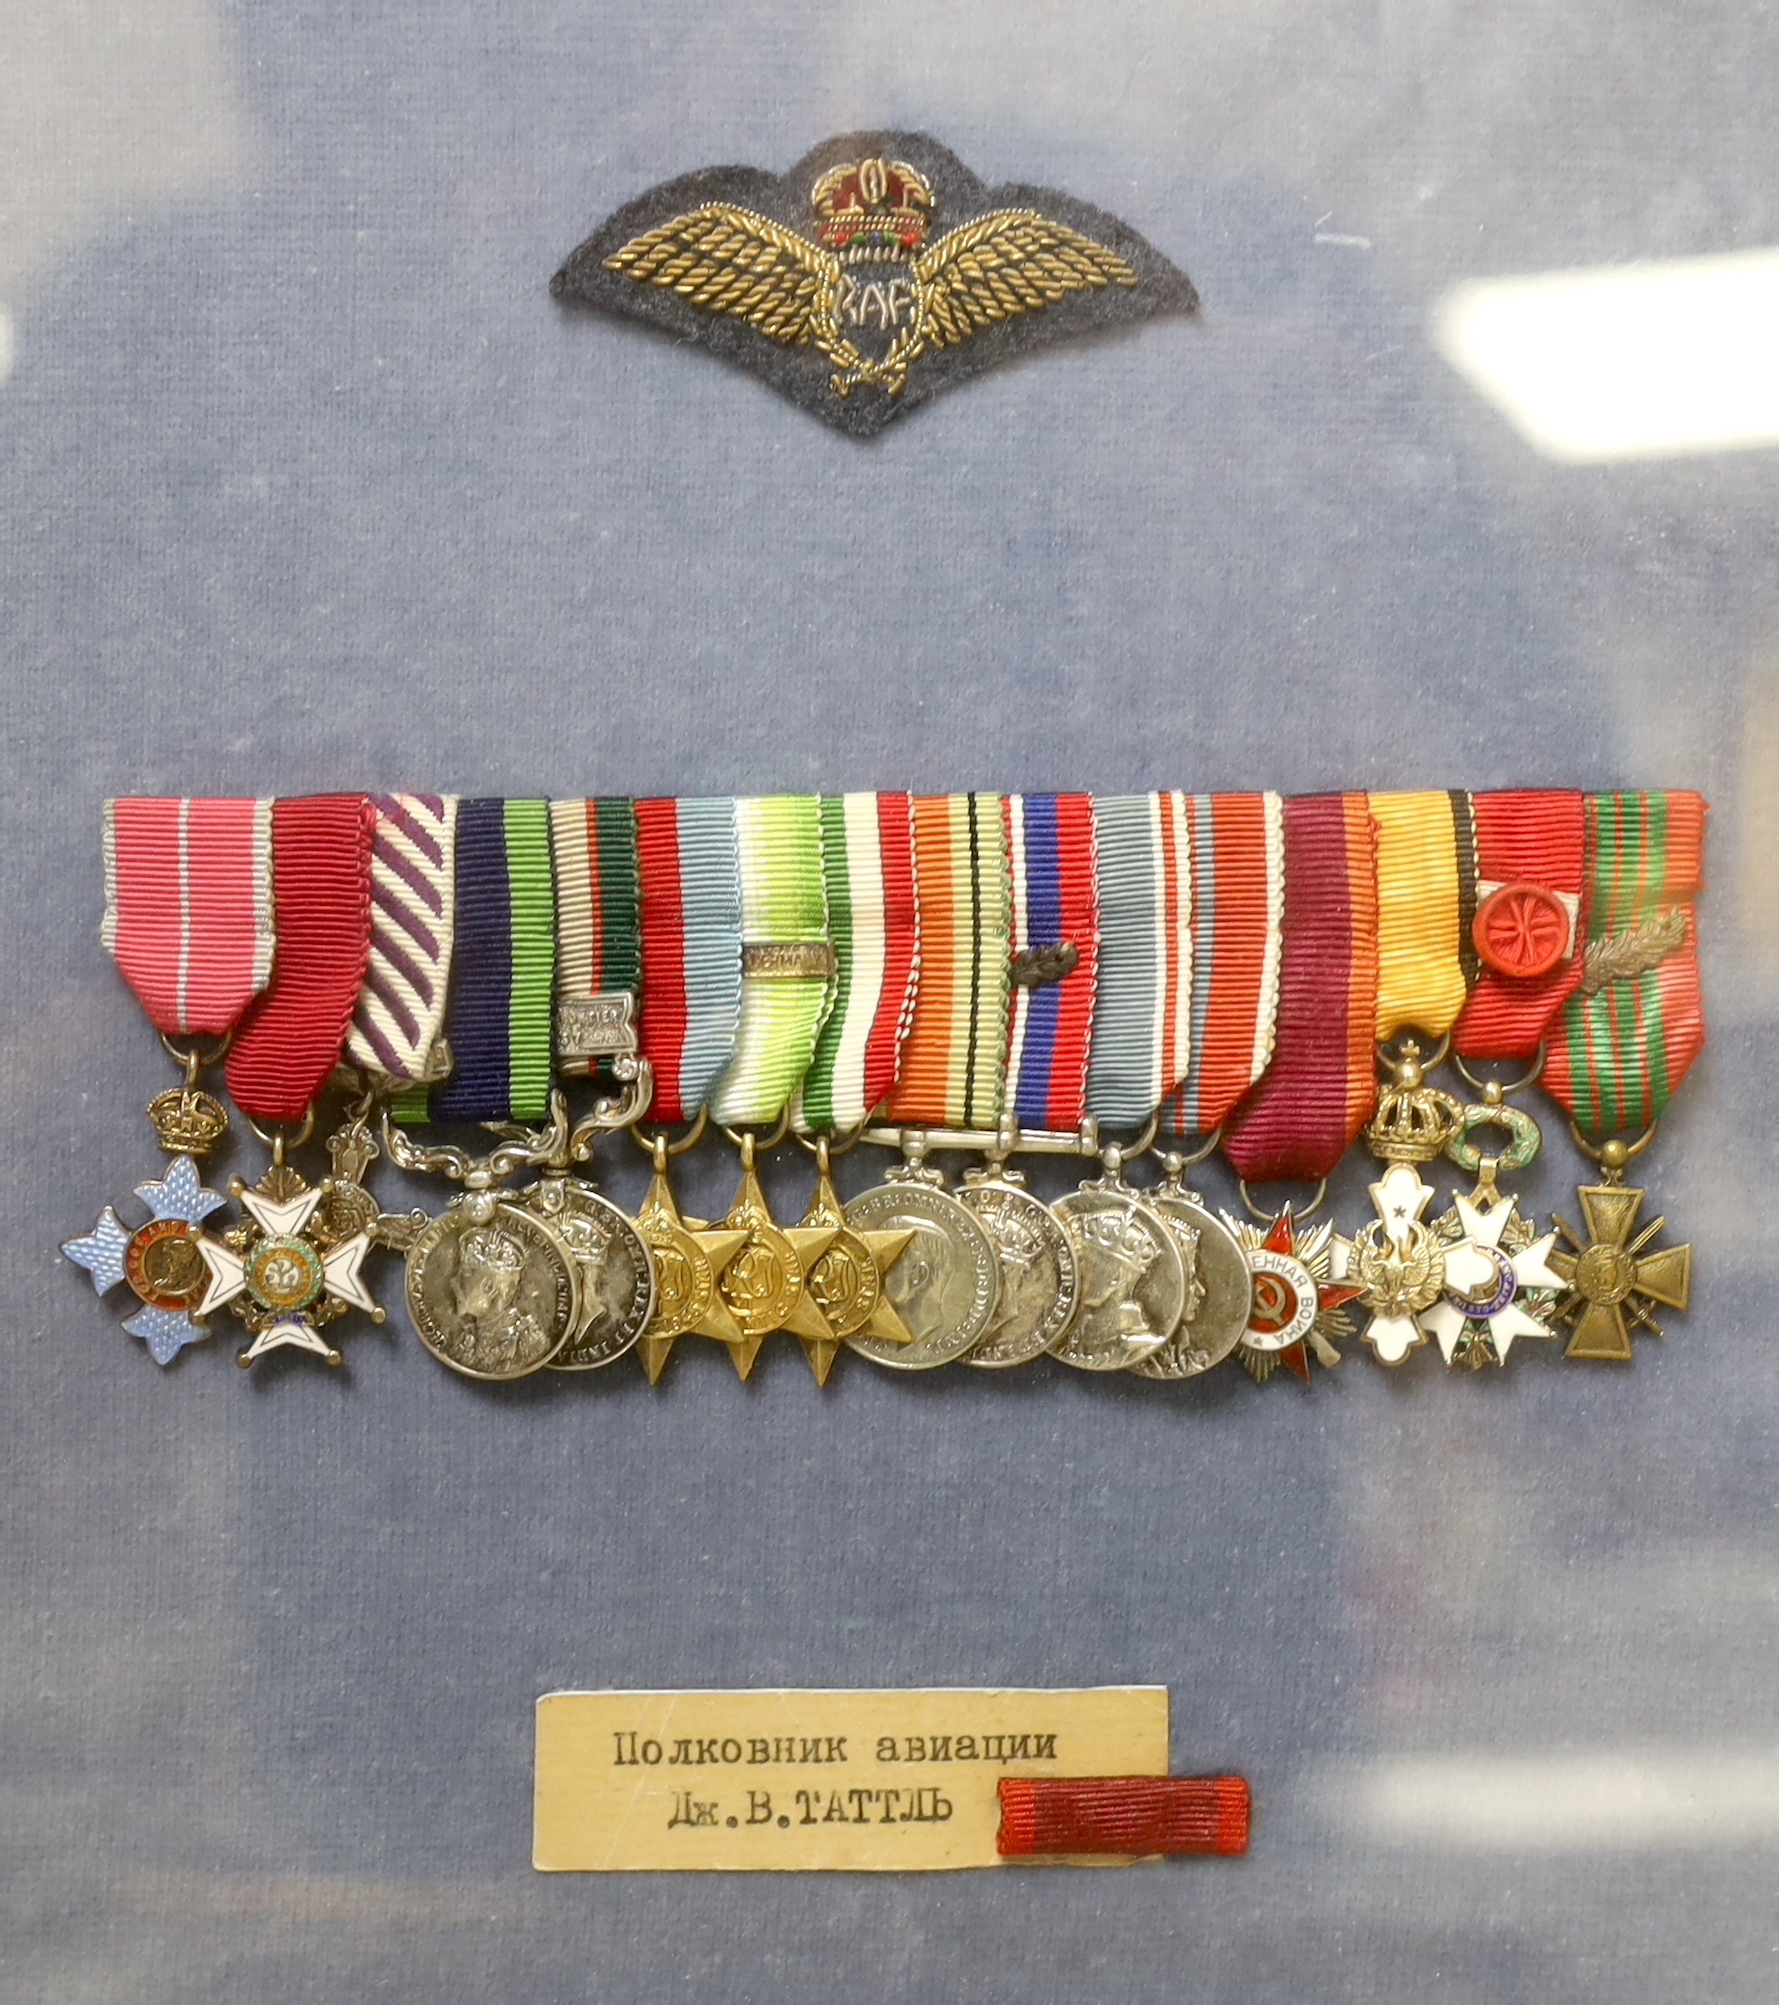 A group of sixteen dress medals awarded to Sir Geoffrey William Tuttle (1906-1989)